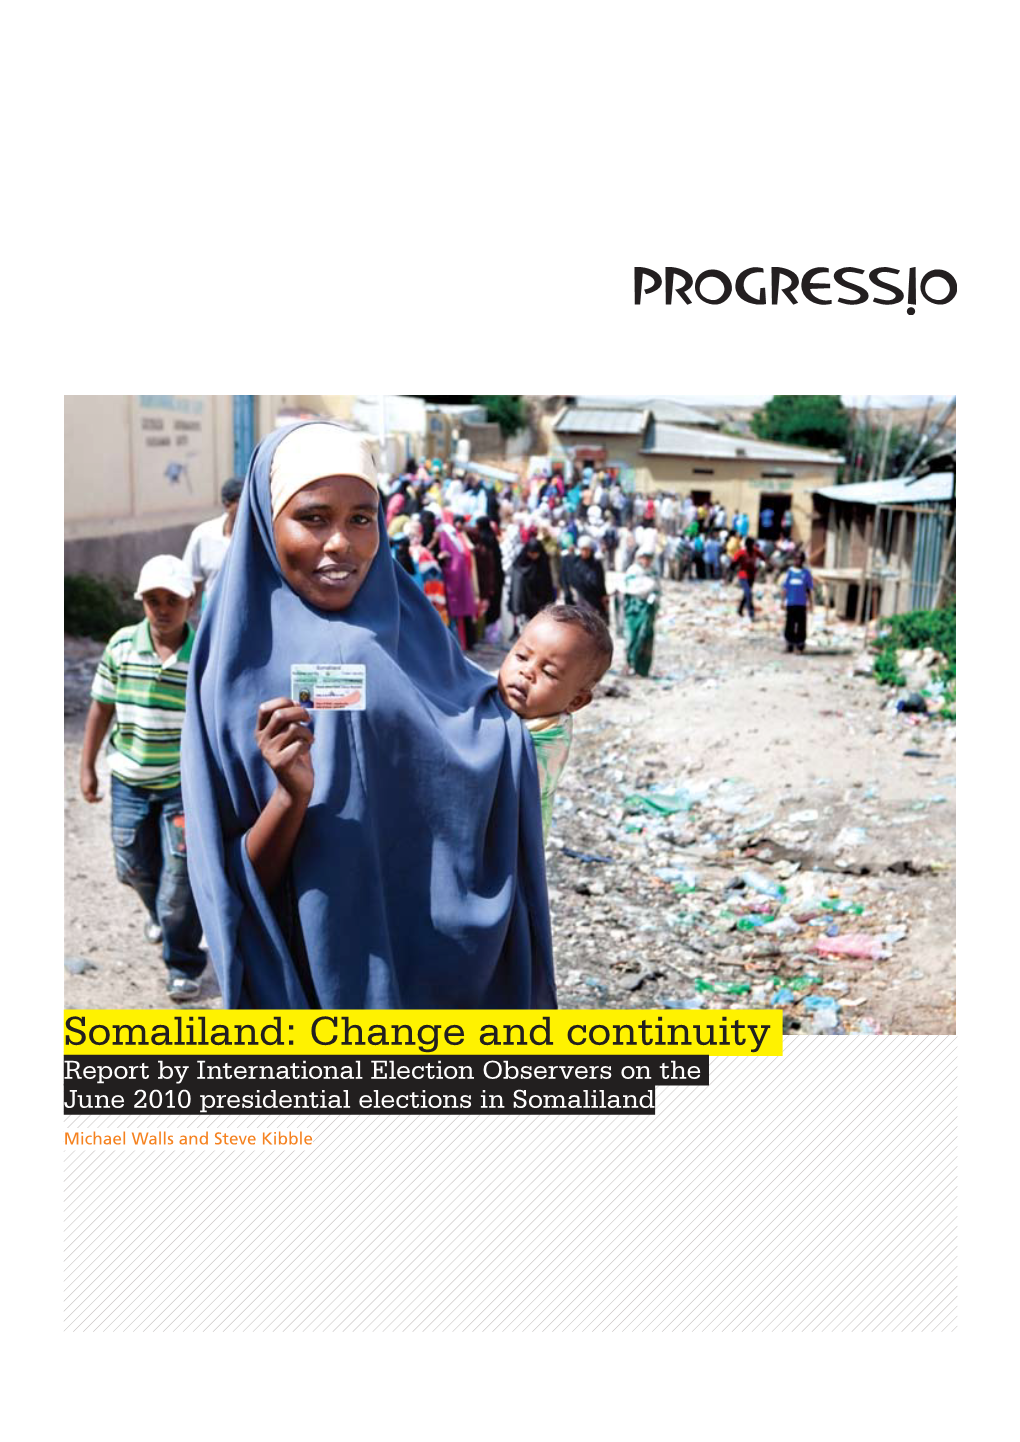 Somaliland: Change and Continuity Report by International Election Observers on the June 2010 Presidential Elections in Somaliland